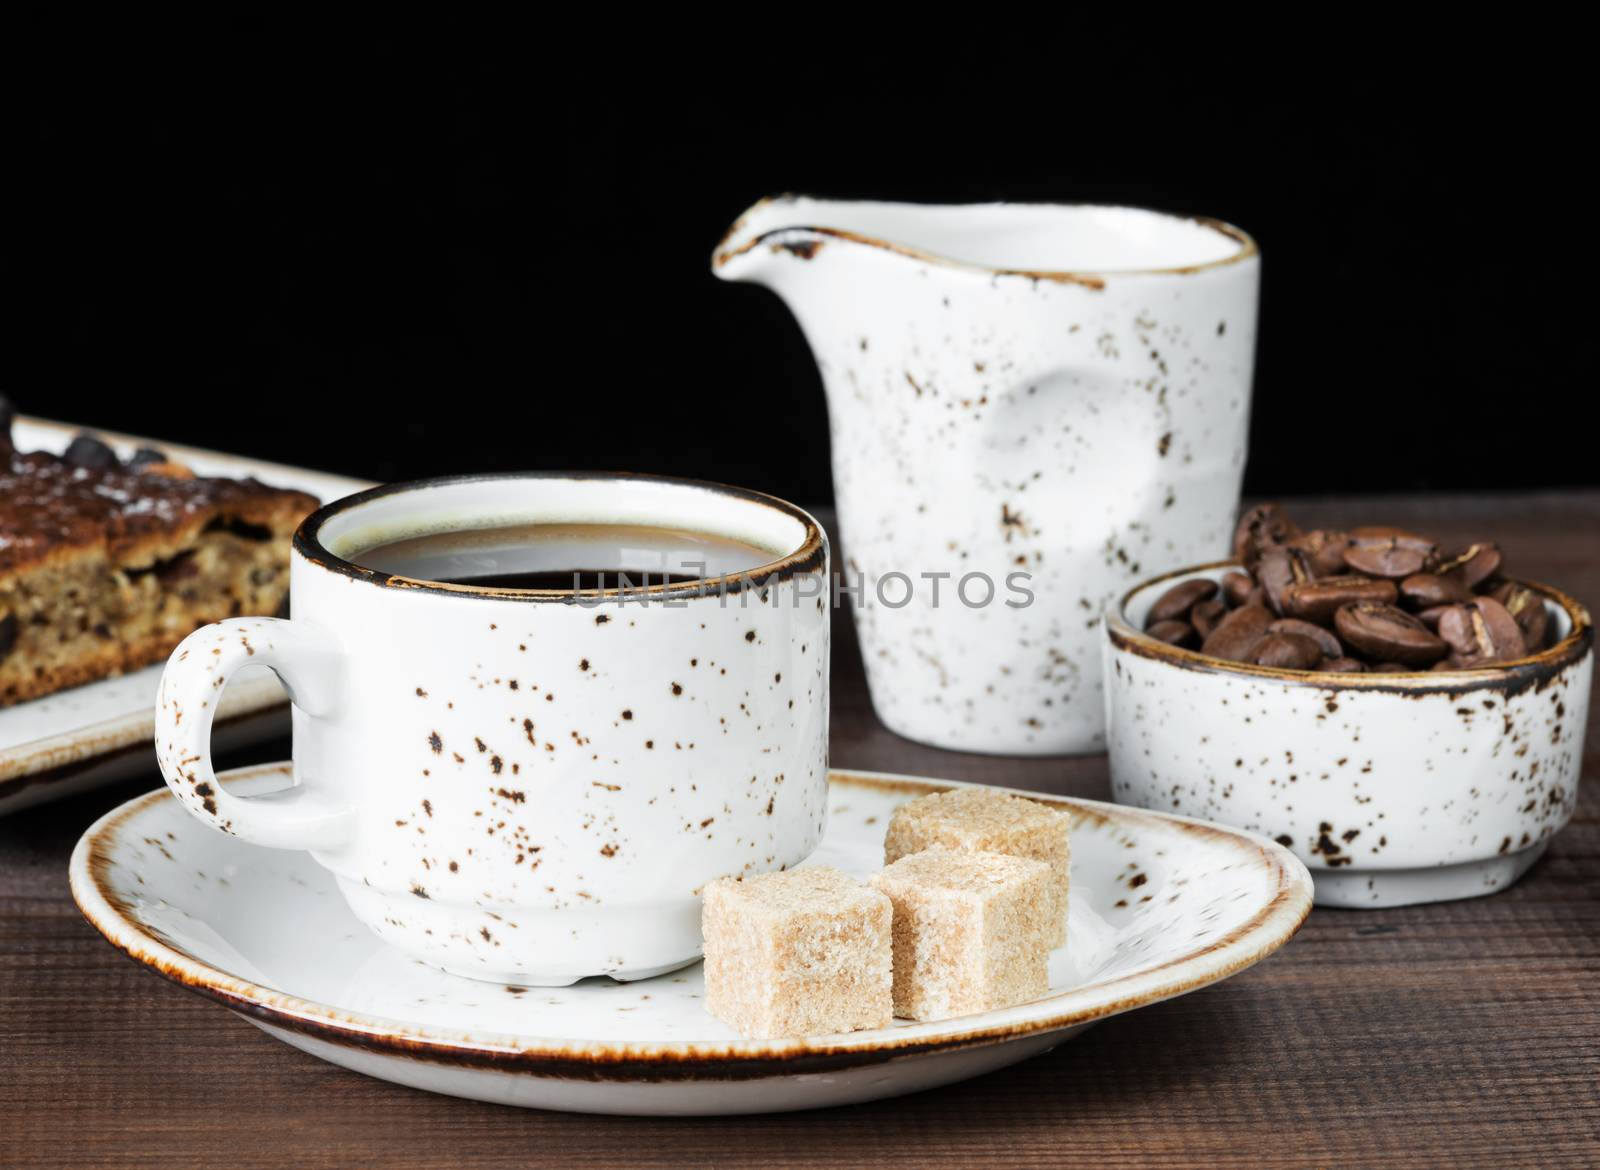 Vintage ceramic cup of coffee, coffee beans, cane sugar and a piece of chocolate cake